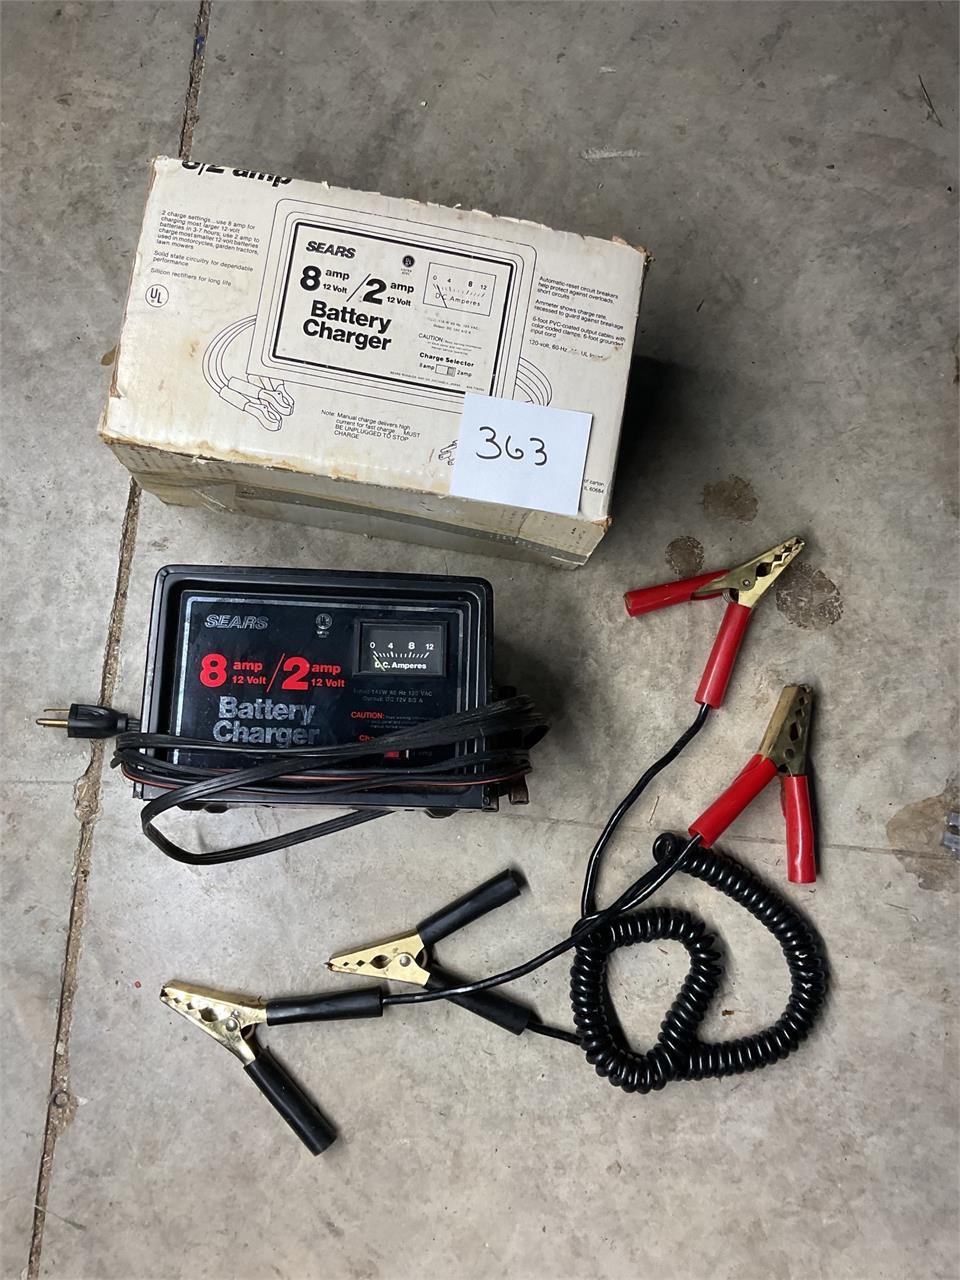 Battery charger, and jumper cables